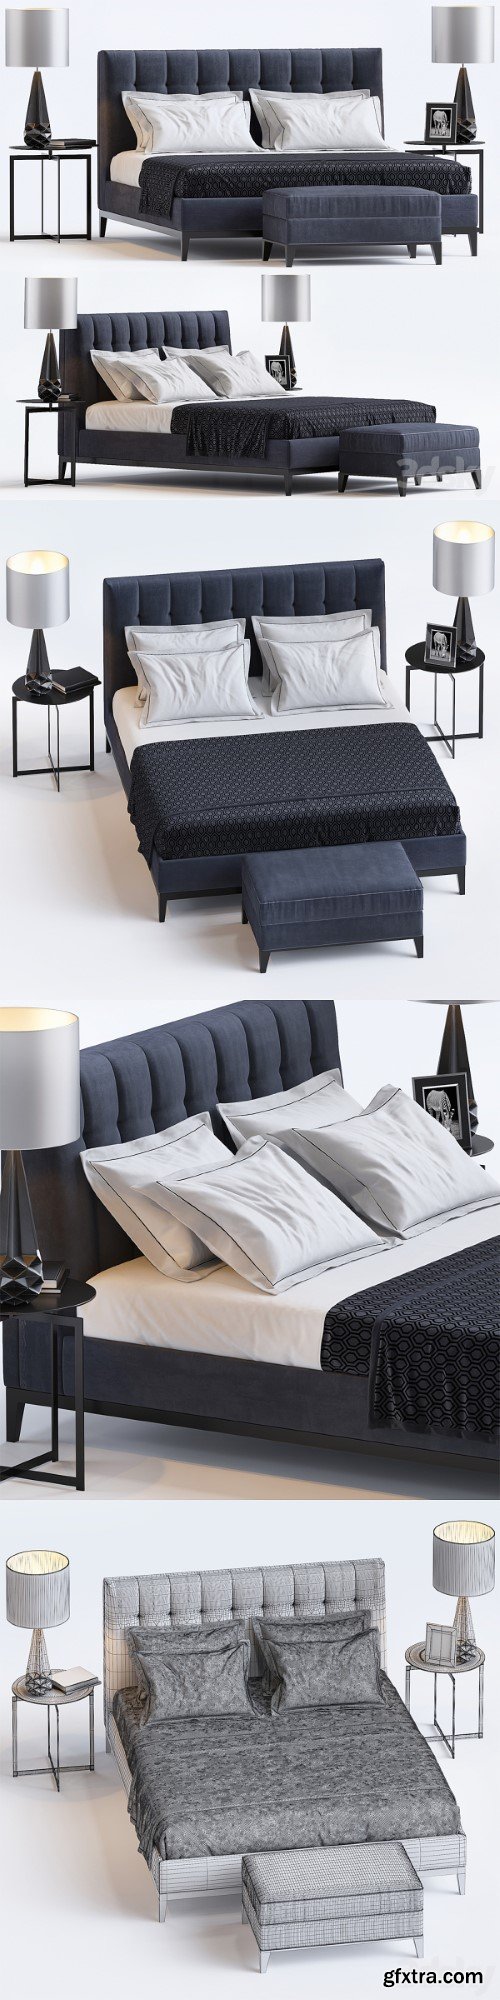 BED BY SOFA AND CHAIR COMPANY 13 | Vray